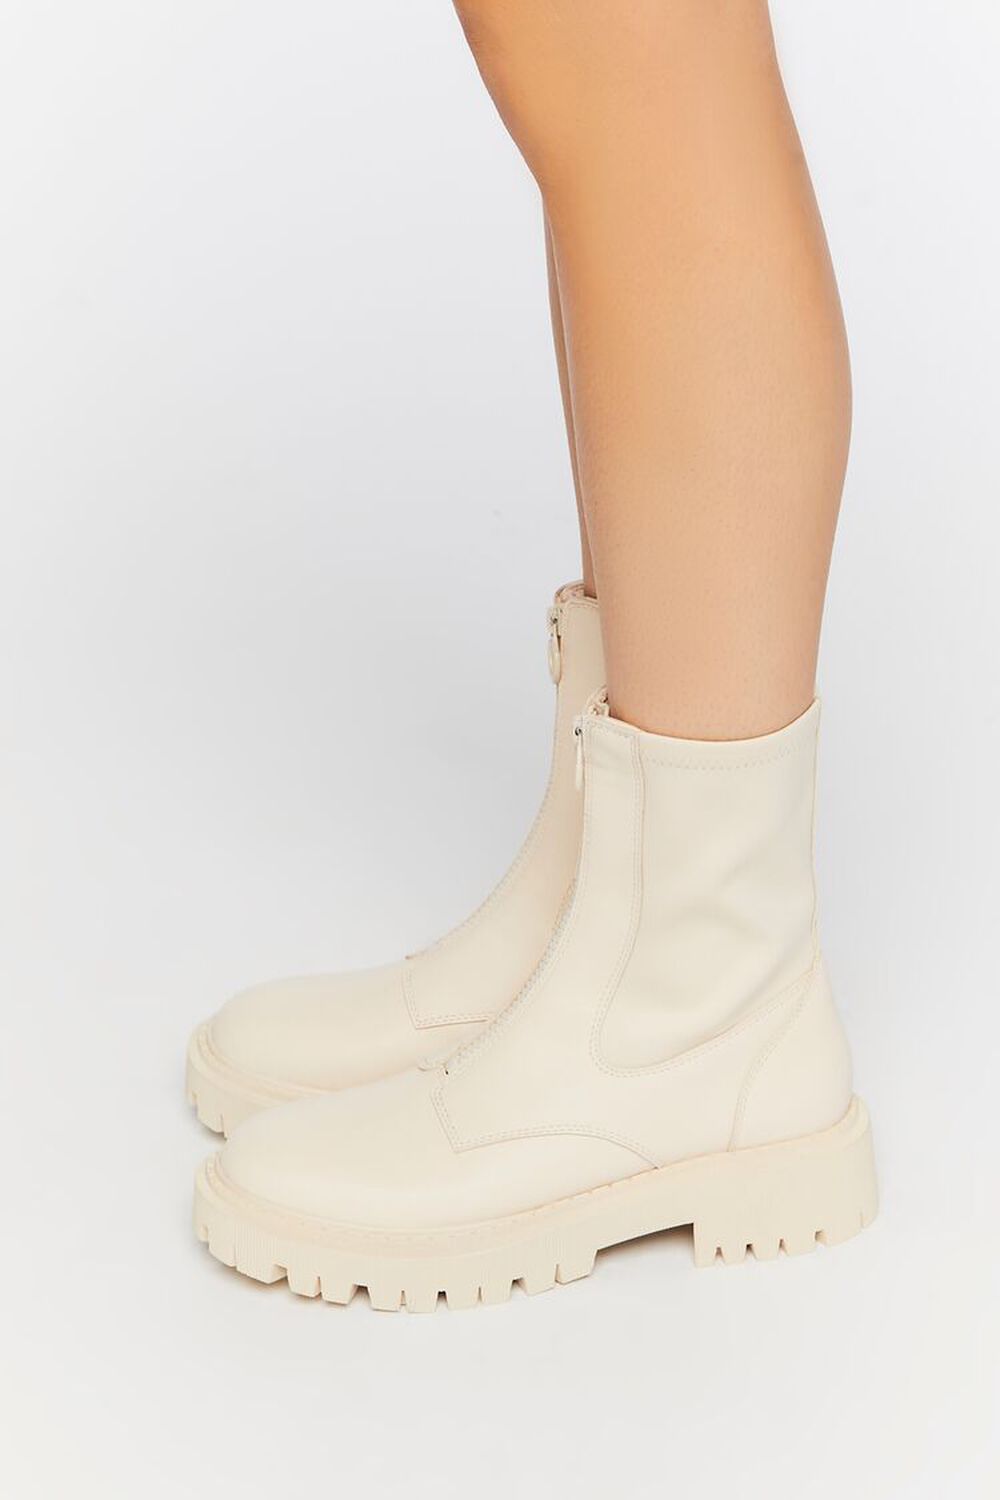 CREAM Zip-Front Faux Leather Booties, image 2